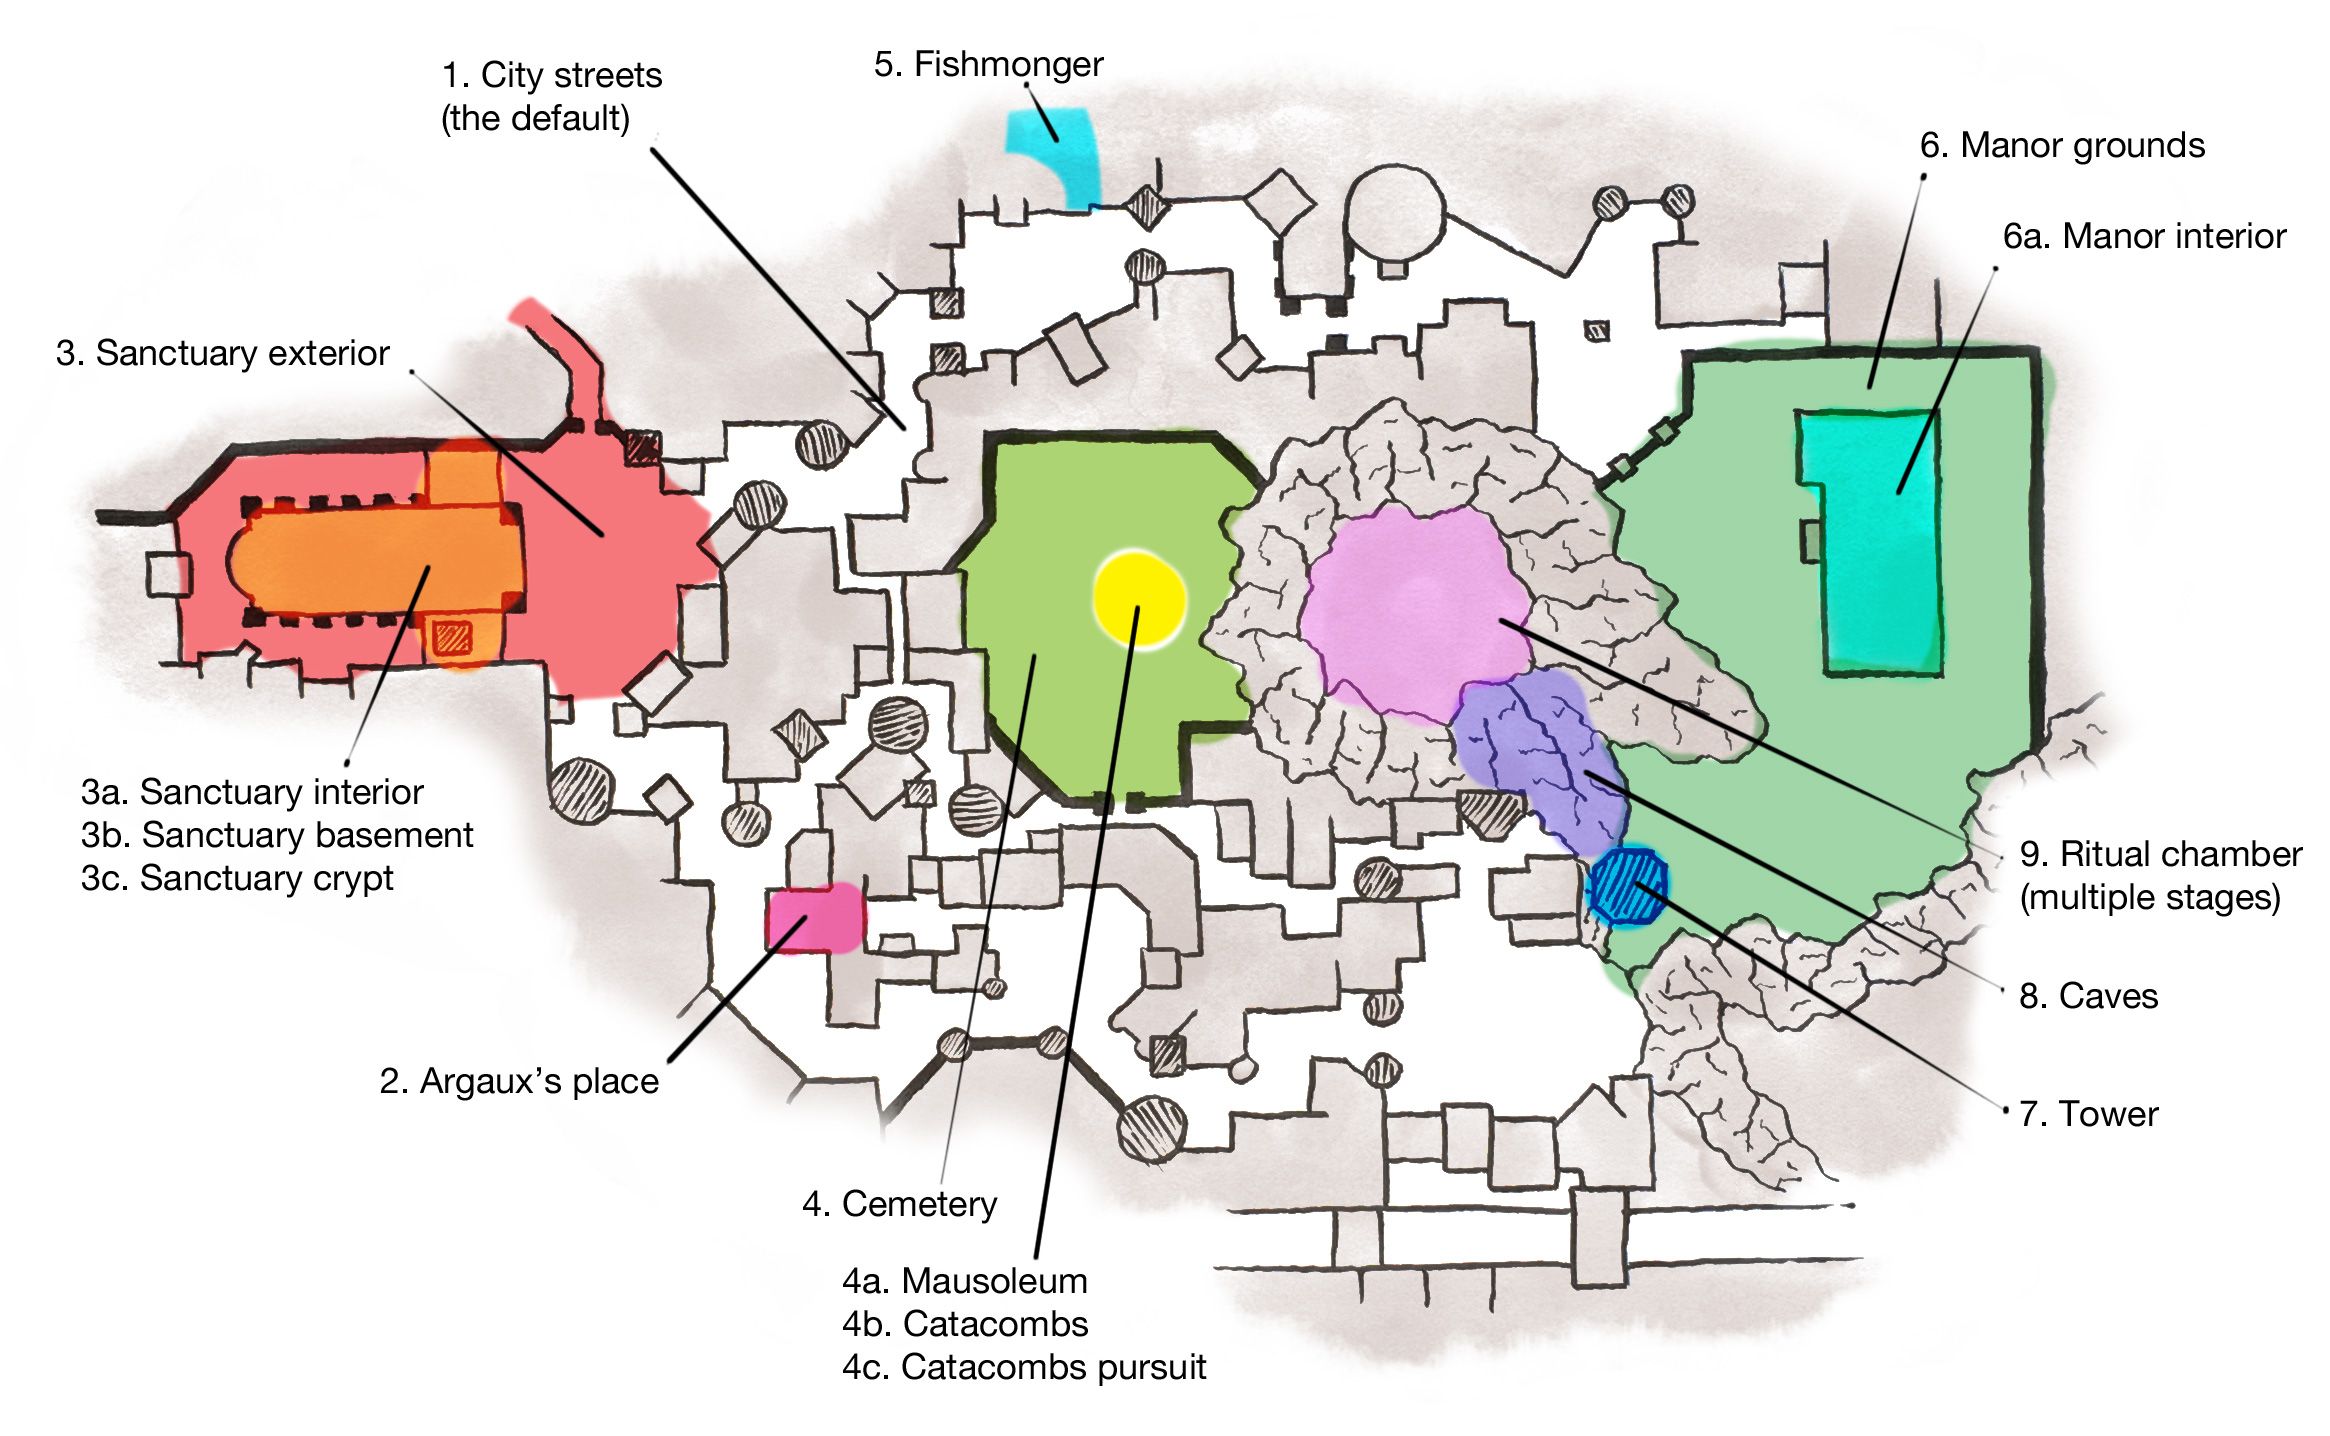 A map of the city, with soundscape regions outlined in different colours. In the west is the Sanctuary exterior, enclosing the sanctuary interior (and by extension its basement and crypt); to the north and south are the small enclaves of Argaux’s place and the Fishmonger’s shop; tn the center is the cemetery, with the mausoleum a small circle in its center; and to the east is the Manor grounds, containing the Manor itself, and on its southernmost edge the Tower, which leads to the Caves, which leads to the Ritual chamber.